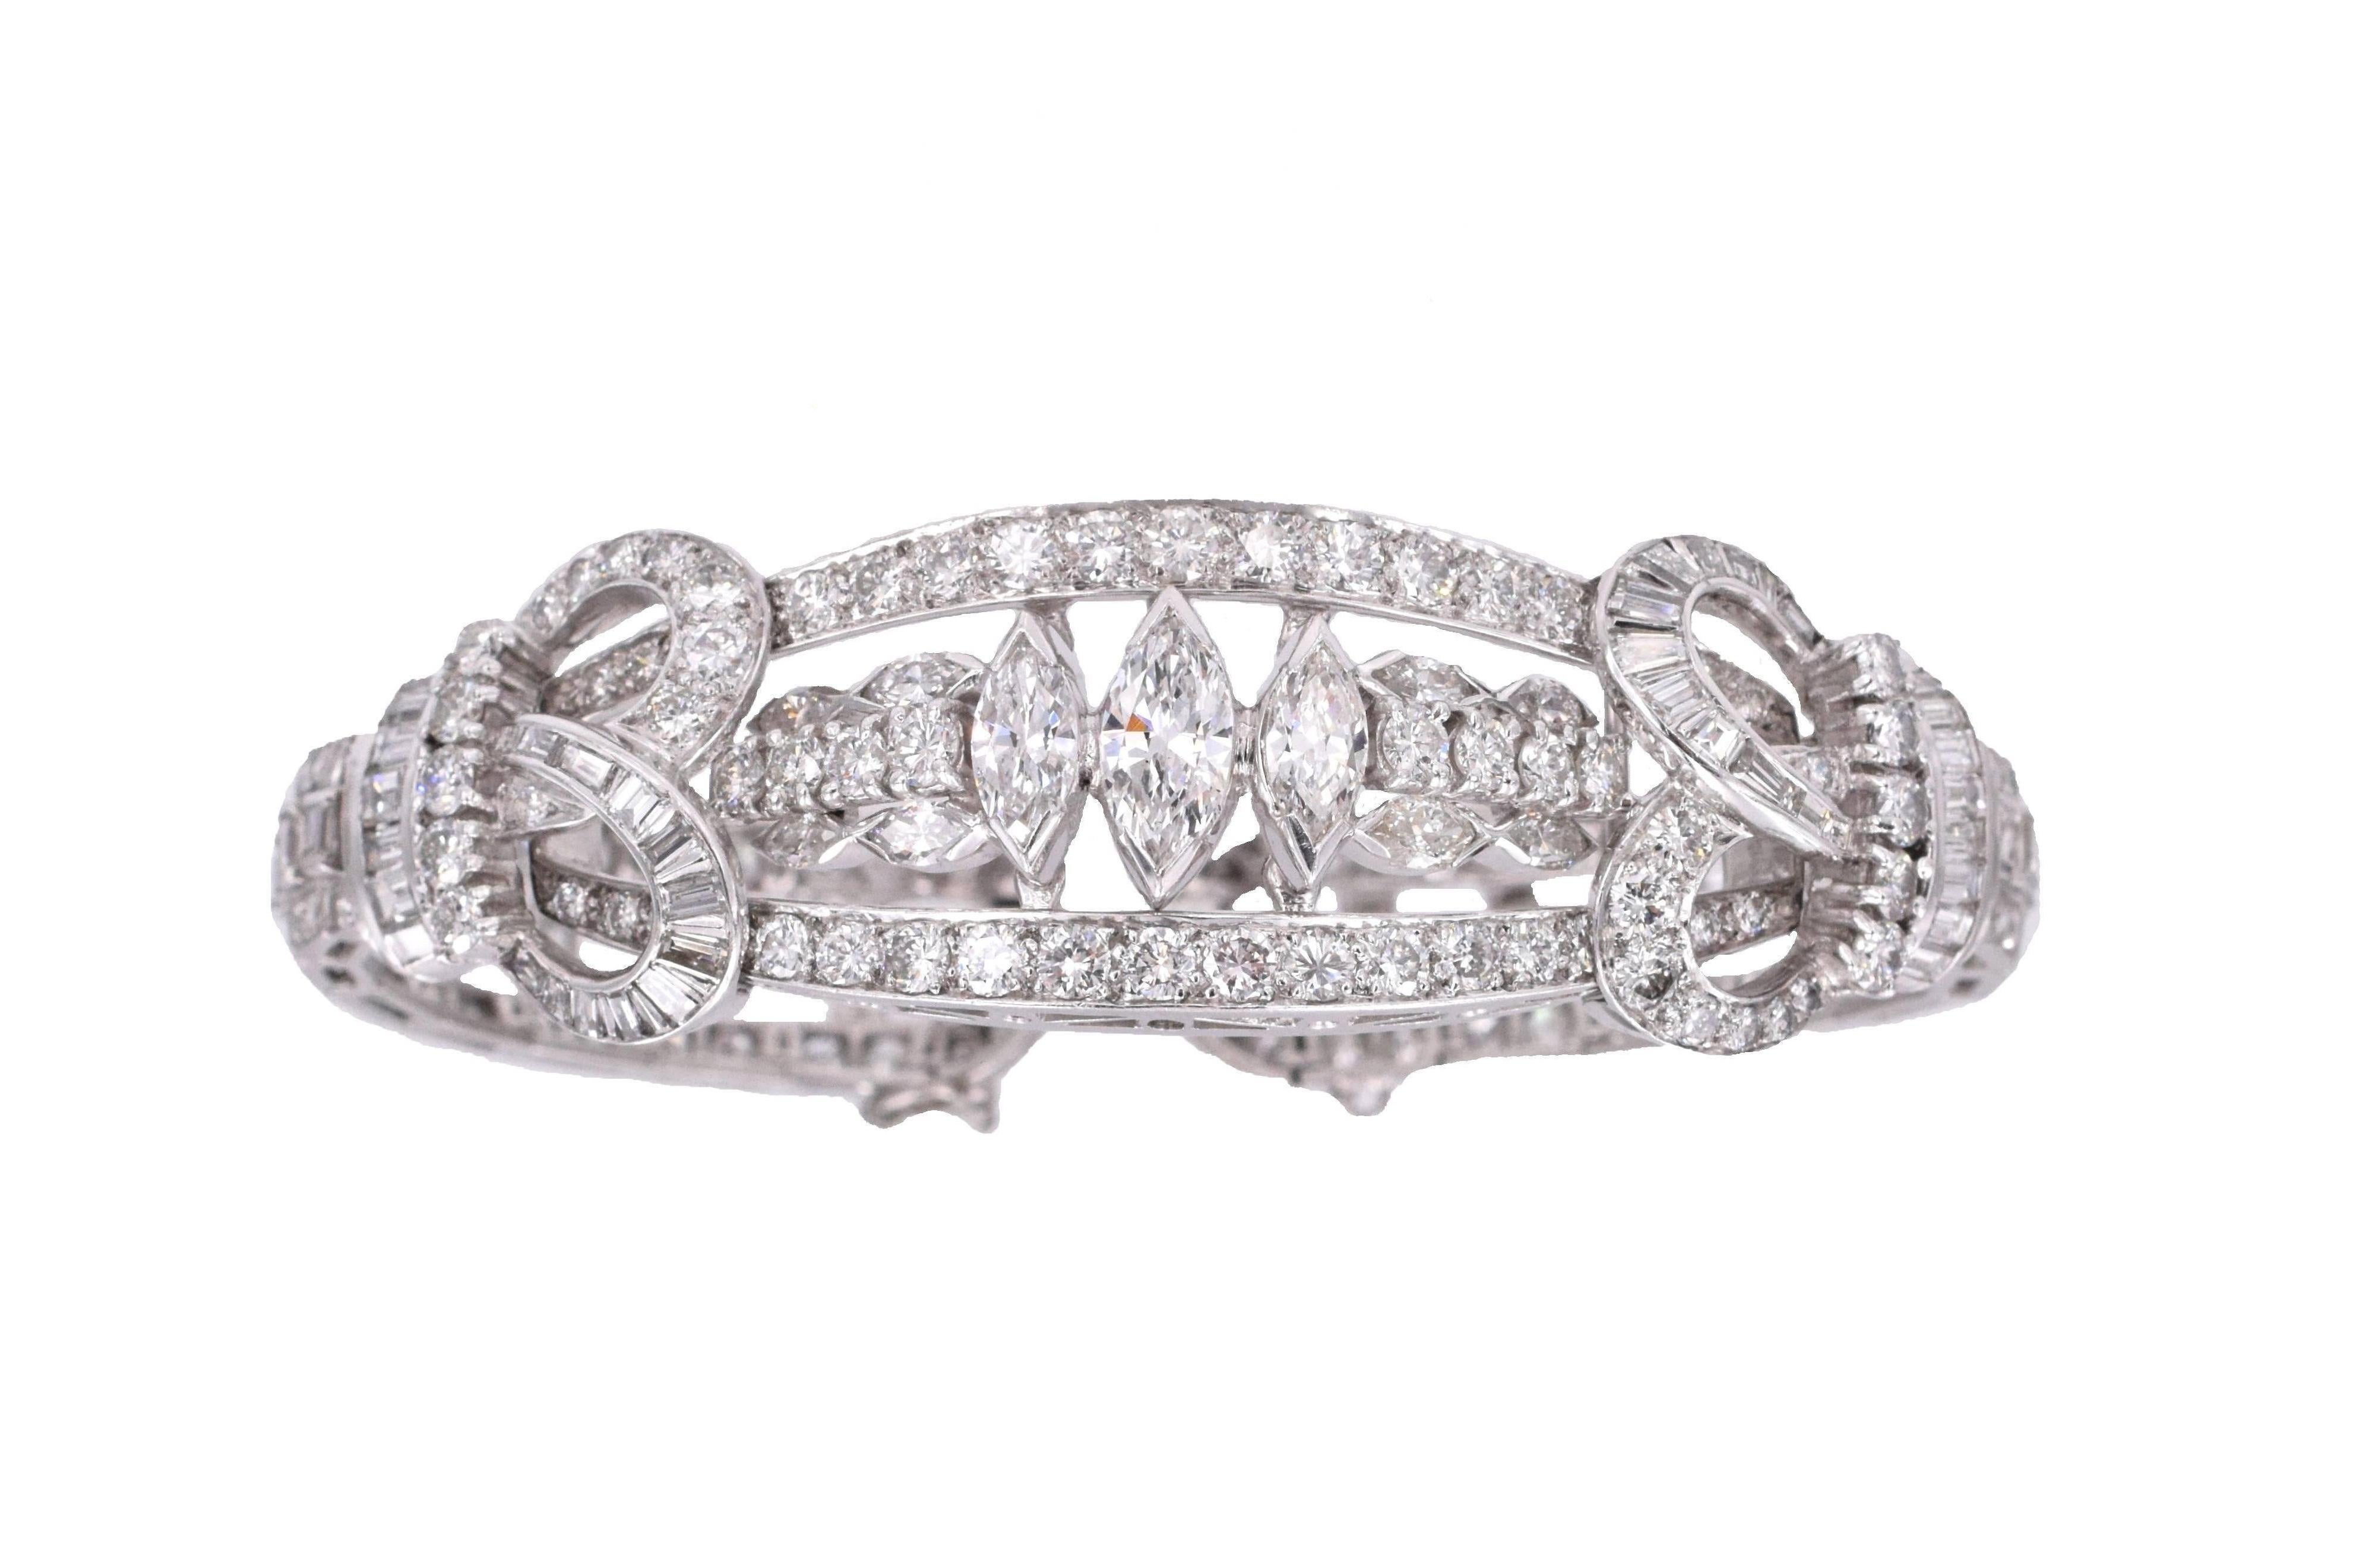 Stunning Art Deco Bracelet
 Circa 1930's
 Estimated diamond weight is 15-16 carats
G- color VS-clarity
Platinum
Length of the bracelet is 6.5 inches